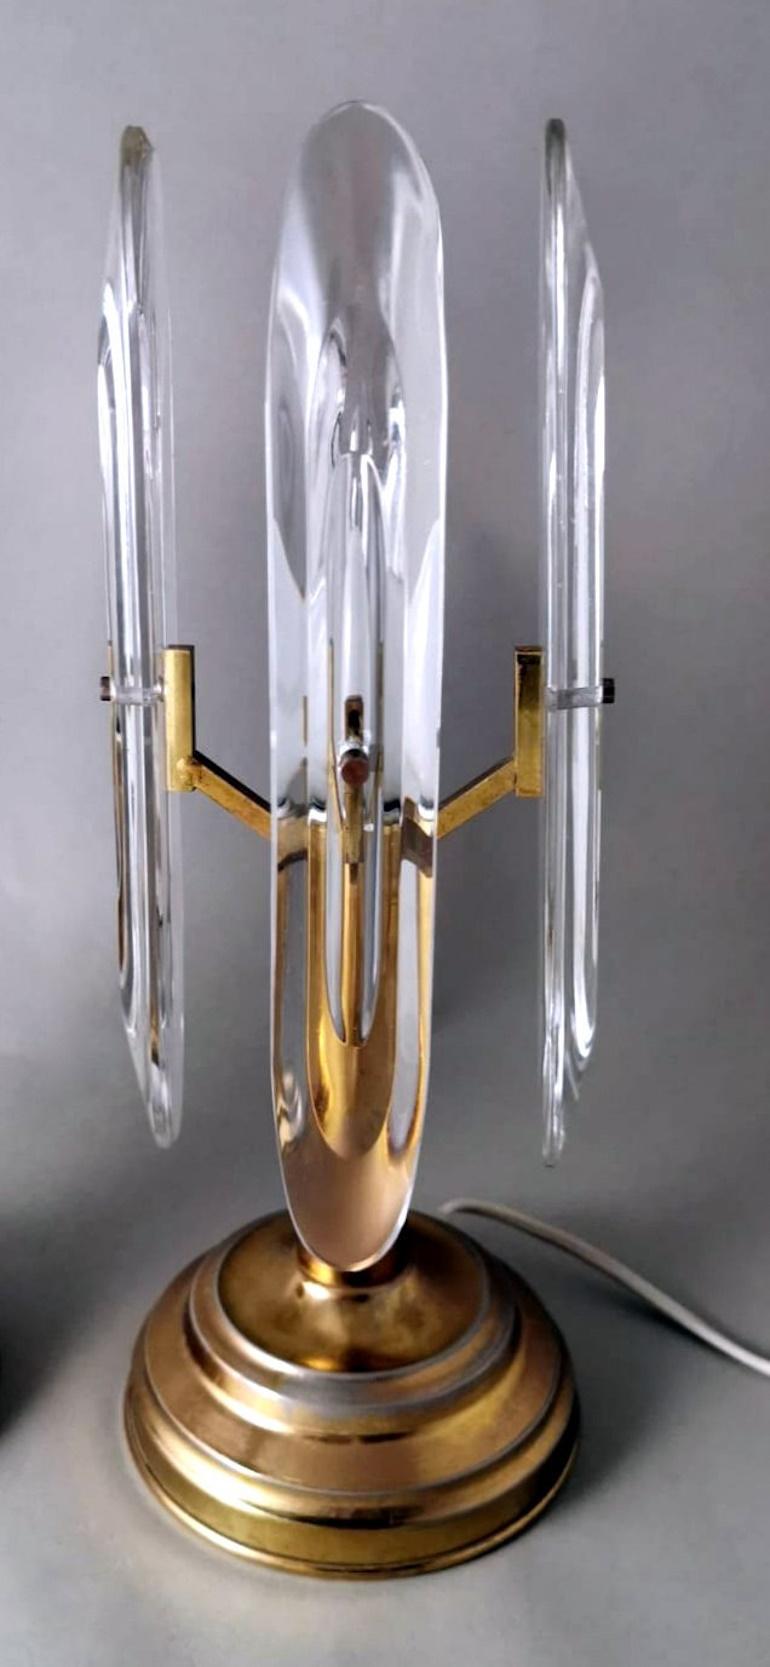 Polished Sciolari Gaetano Pair Of Italian Table Lamps In Brass And Crystal For Sale